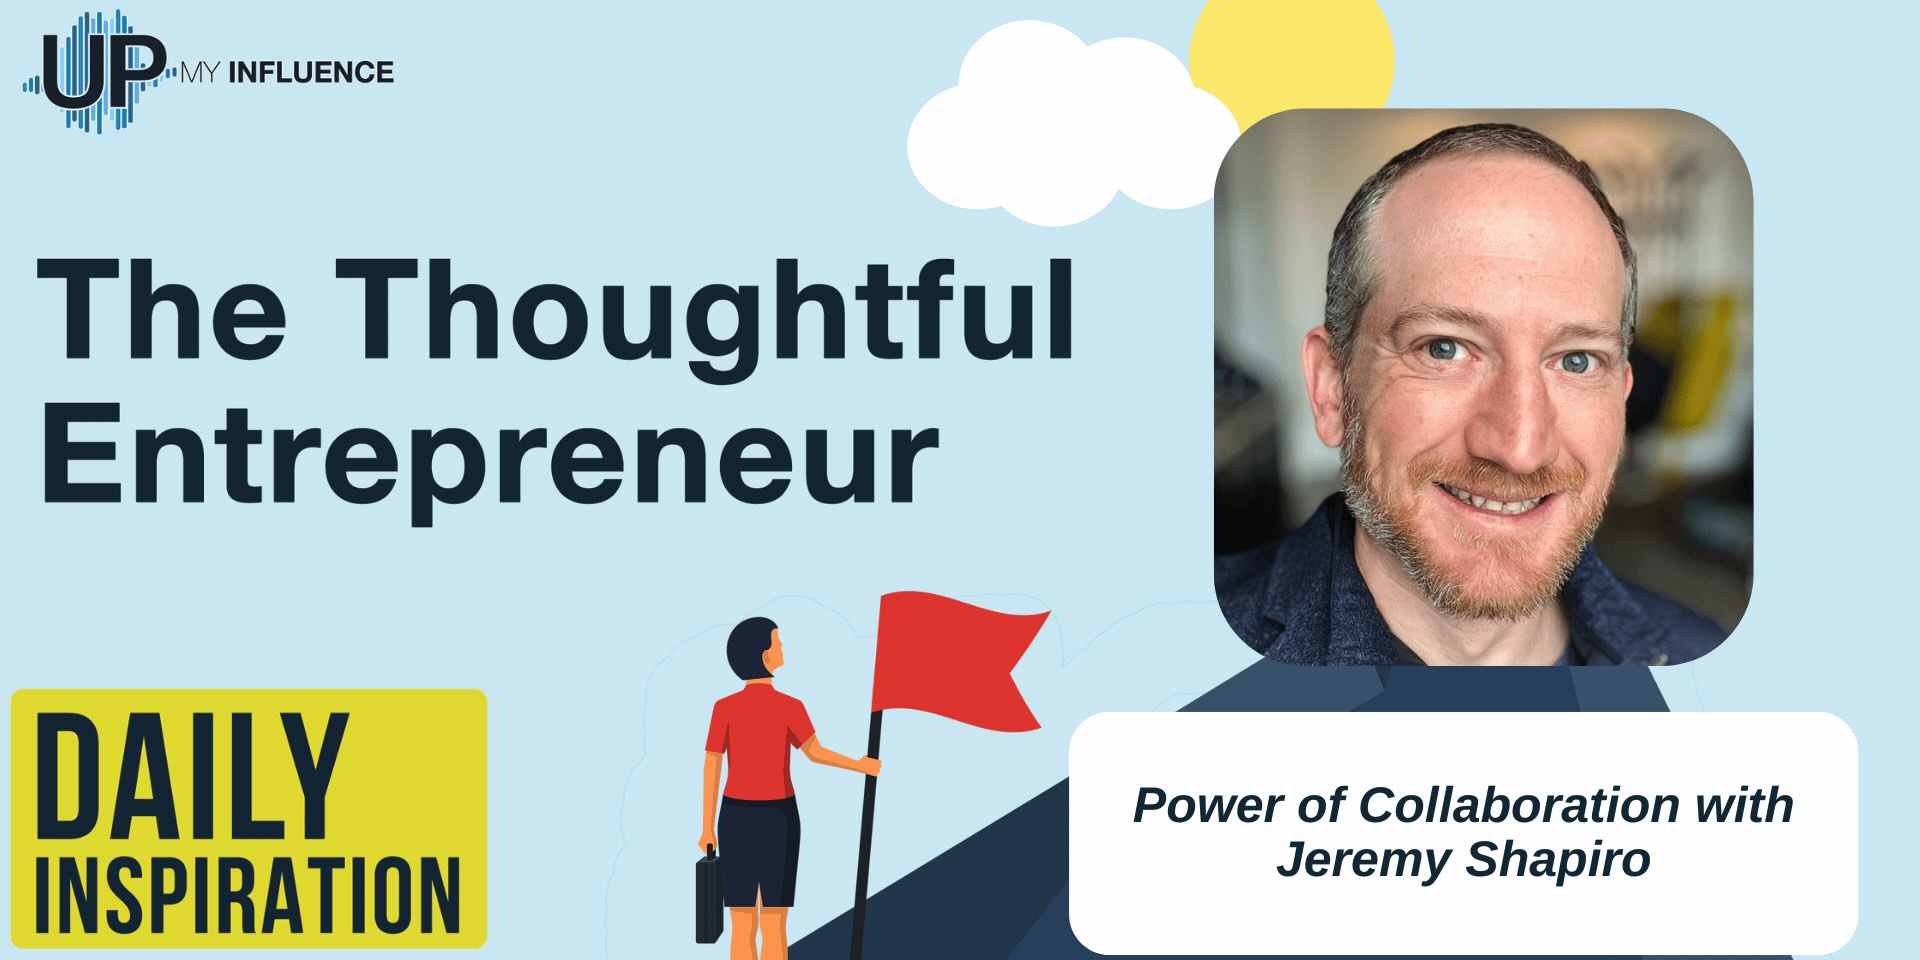 The Thoughtful Entrepreneur: Power of Collaboration